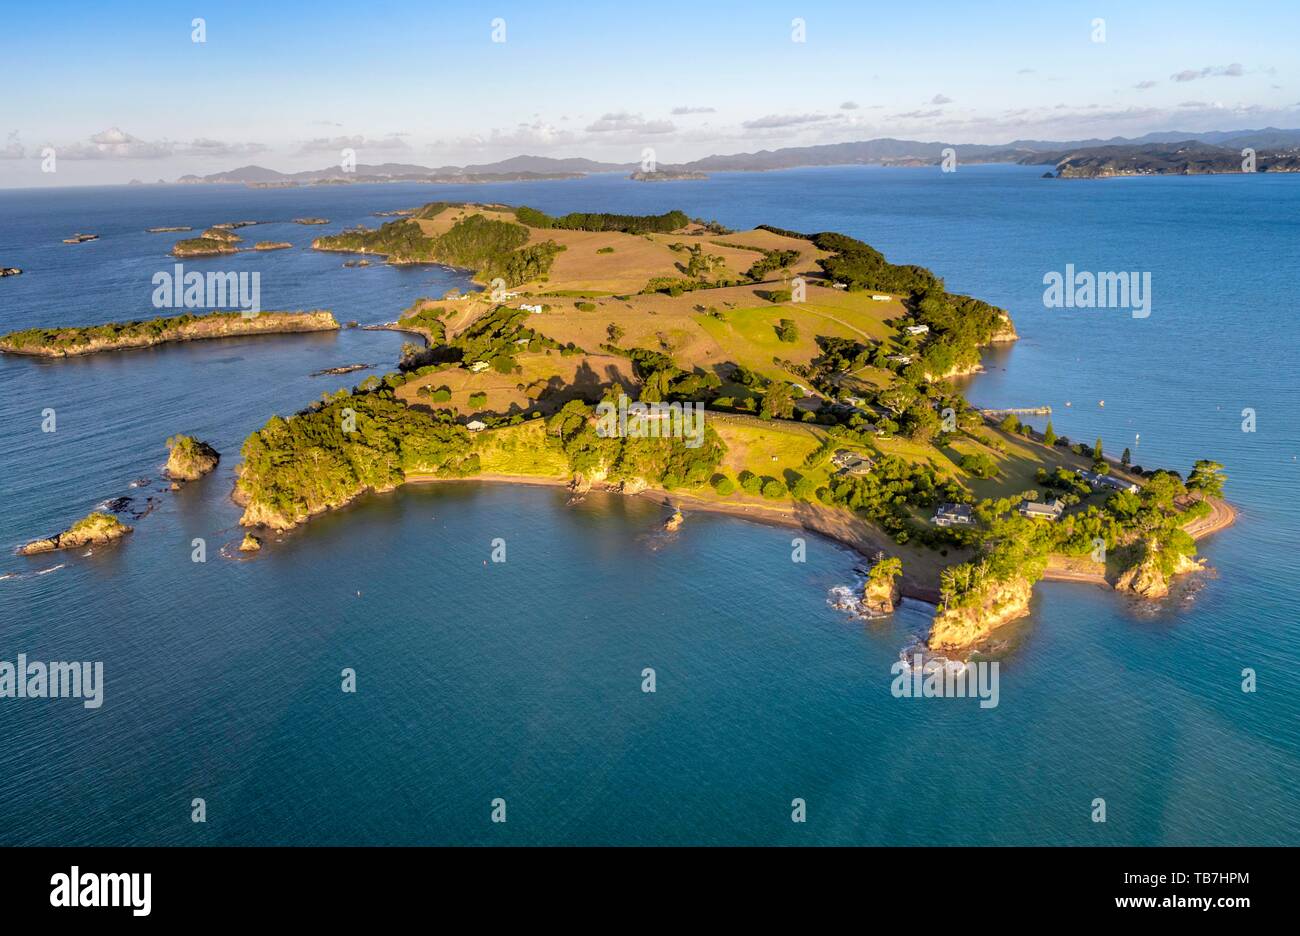 Aerial view of an island in the Bay of Islands, Far North District, North Island, New Zealand Stock Photo